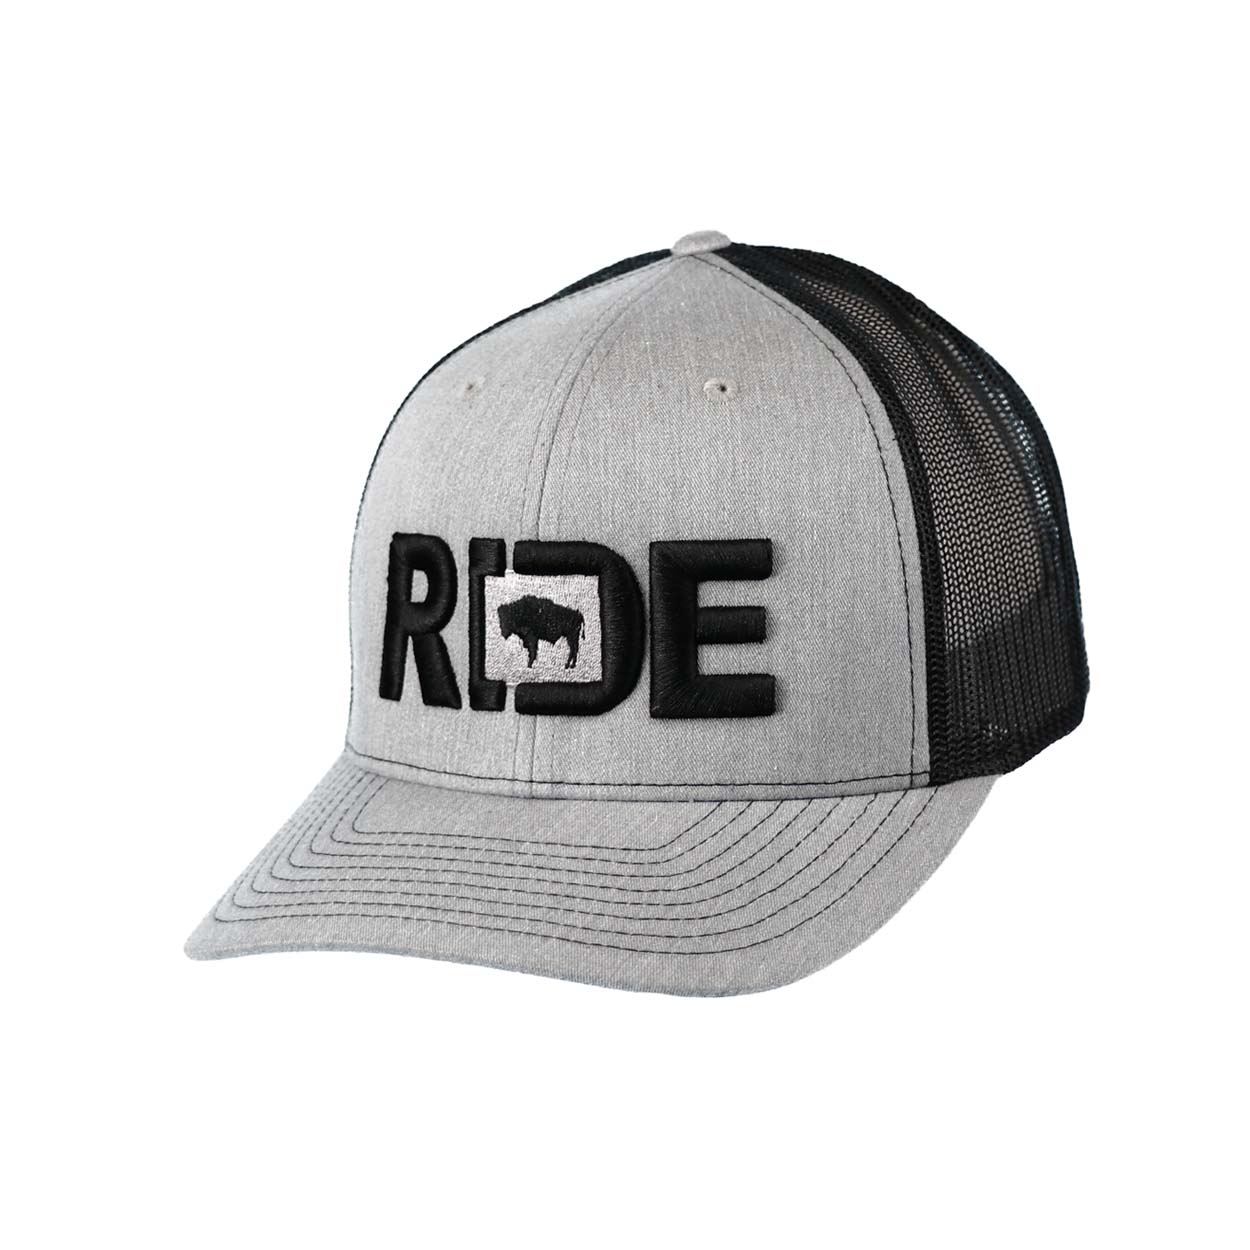 Ride Wyoming Classic Embroidered Snapback Trucker Hat Heather Gray/Black